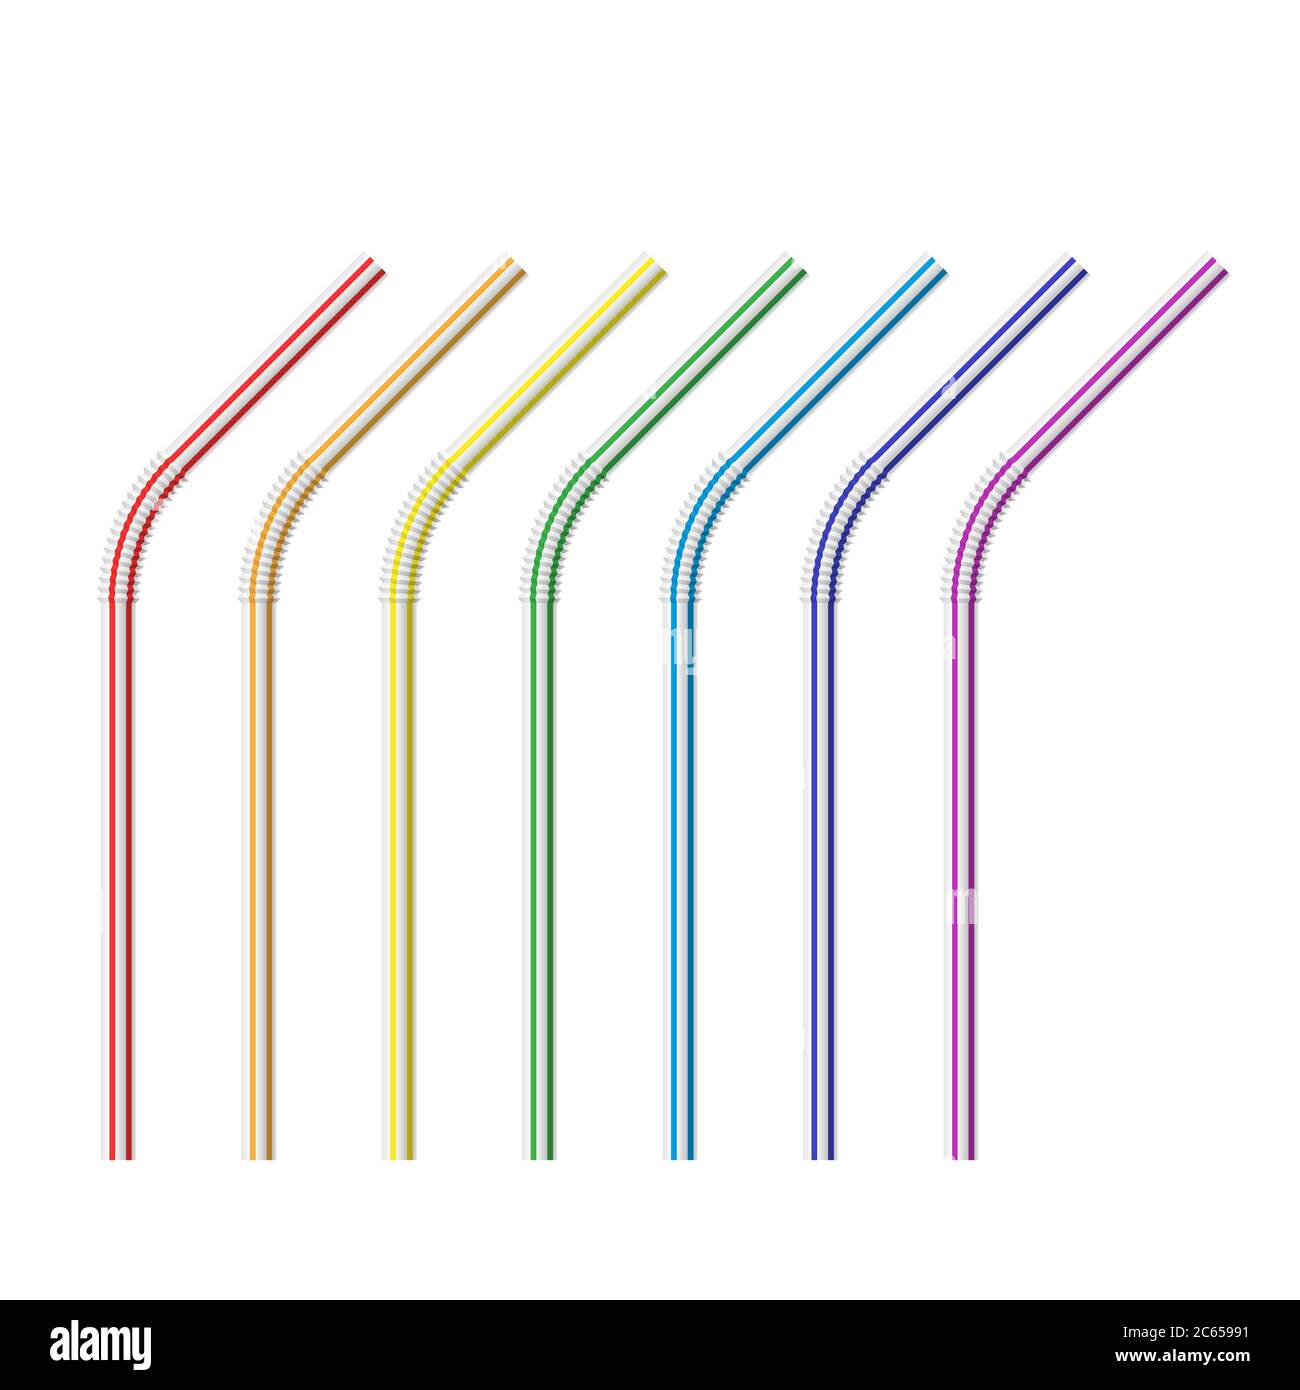 Vector realistic drinking straws striped for milk drinks, cocktails or alcohol. Set of colorful drinking straws isolated with bends. Template for desi Stock Vector